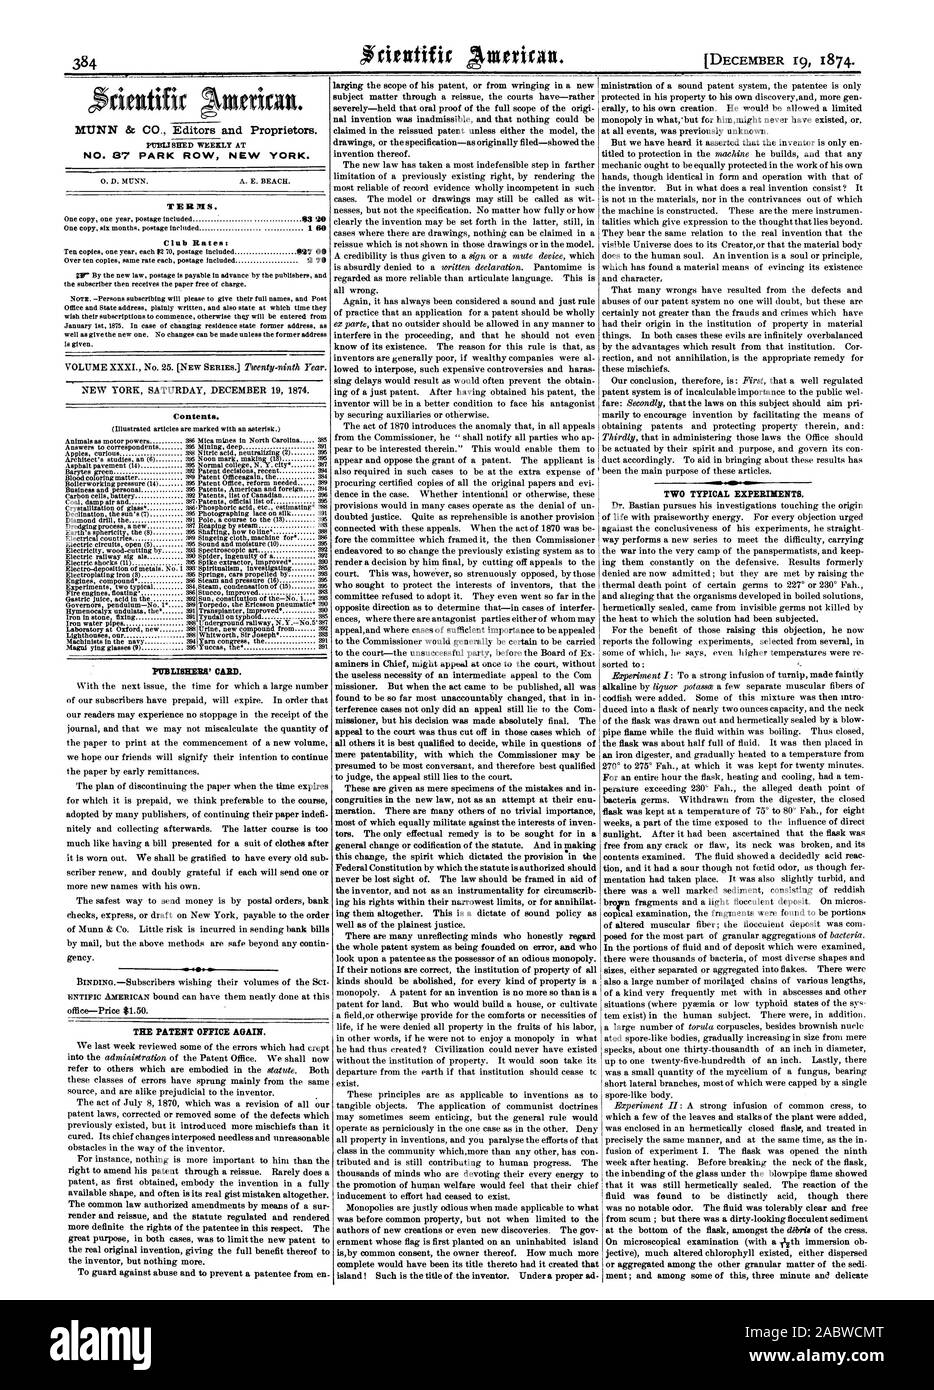 MUNN & CO. Editors and Proprietors. PUBLISHED WEEKLY AT NO. 87 PARK ROW NEW YORK. T Eli 31 S. 03 20 1 60 Club Rates: 037 00 2 70 Contents. PUBLISH:ERA' CARD. THE PATENT OFFICE AGAIN. TWO TYPICAL EXPERIMENTS., scientific american, 1874-12-19 Stock Photo